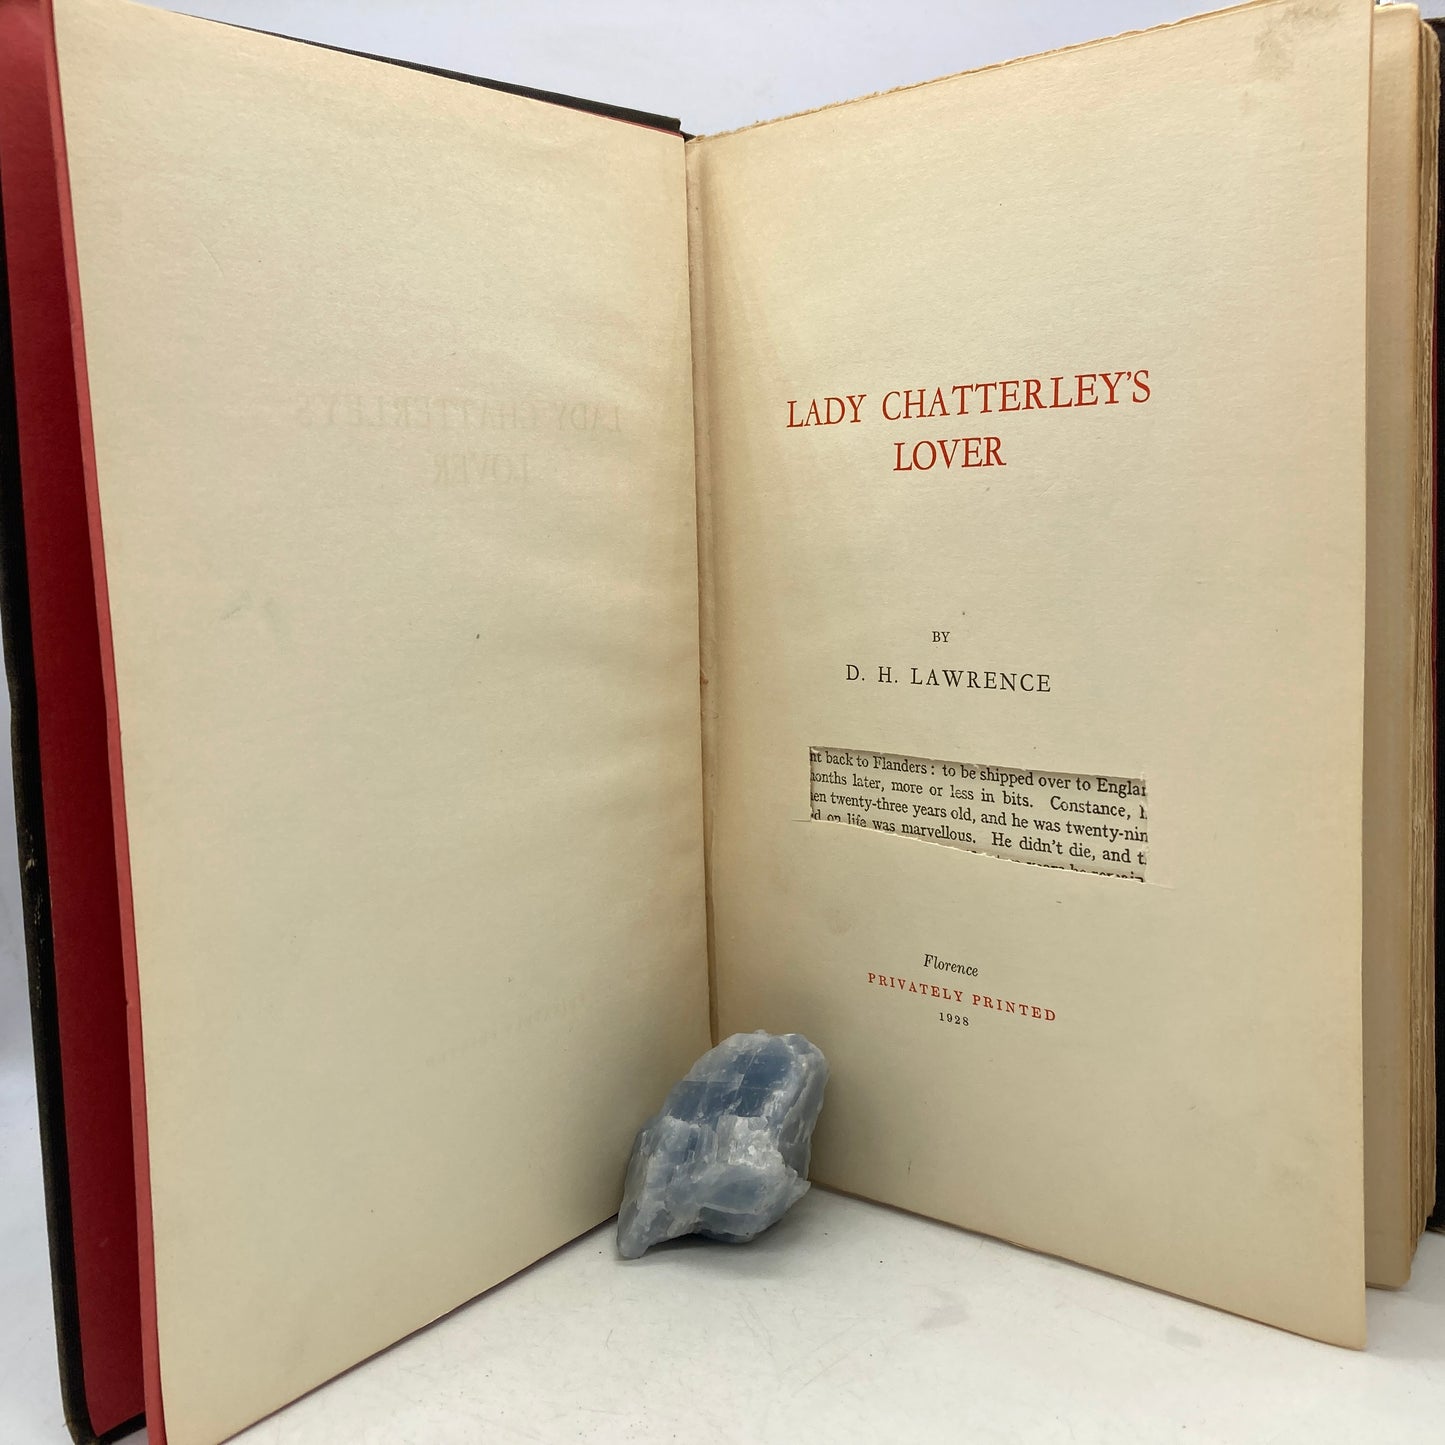 LAWRENCE, D.H. "Lady Chatterly's Lover" [Privately Printed, 1928] Pirated Edition